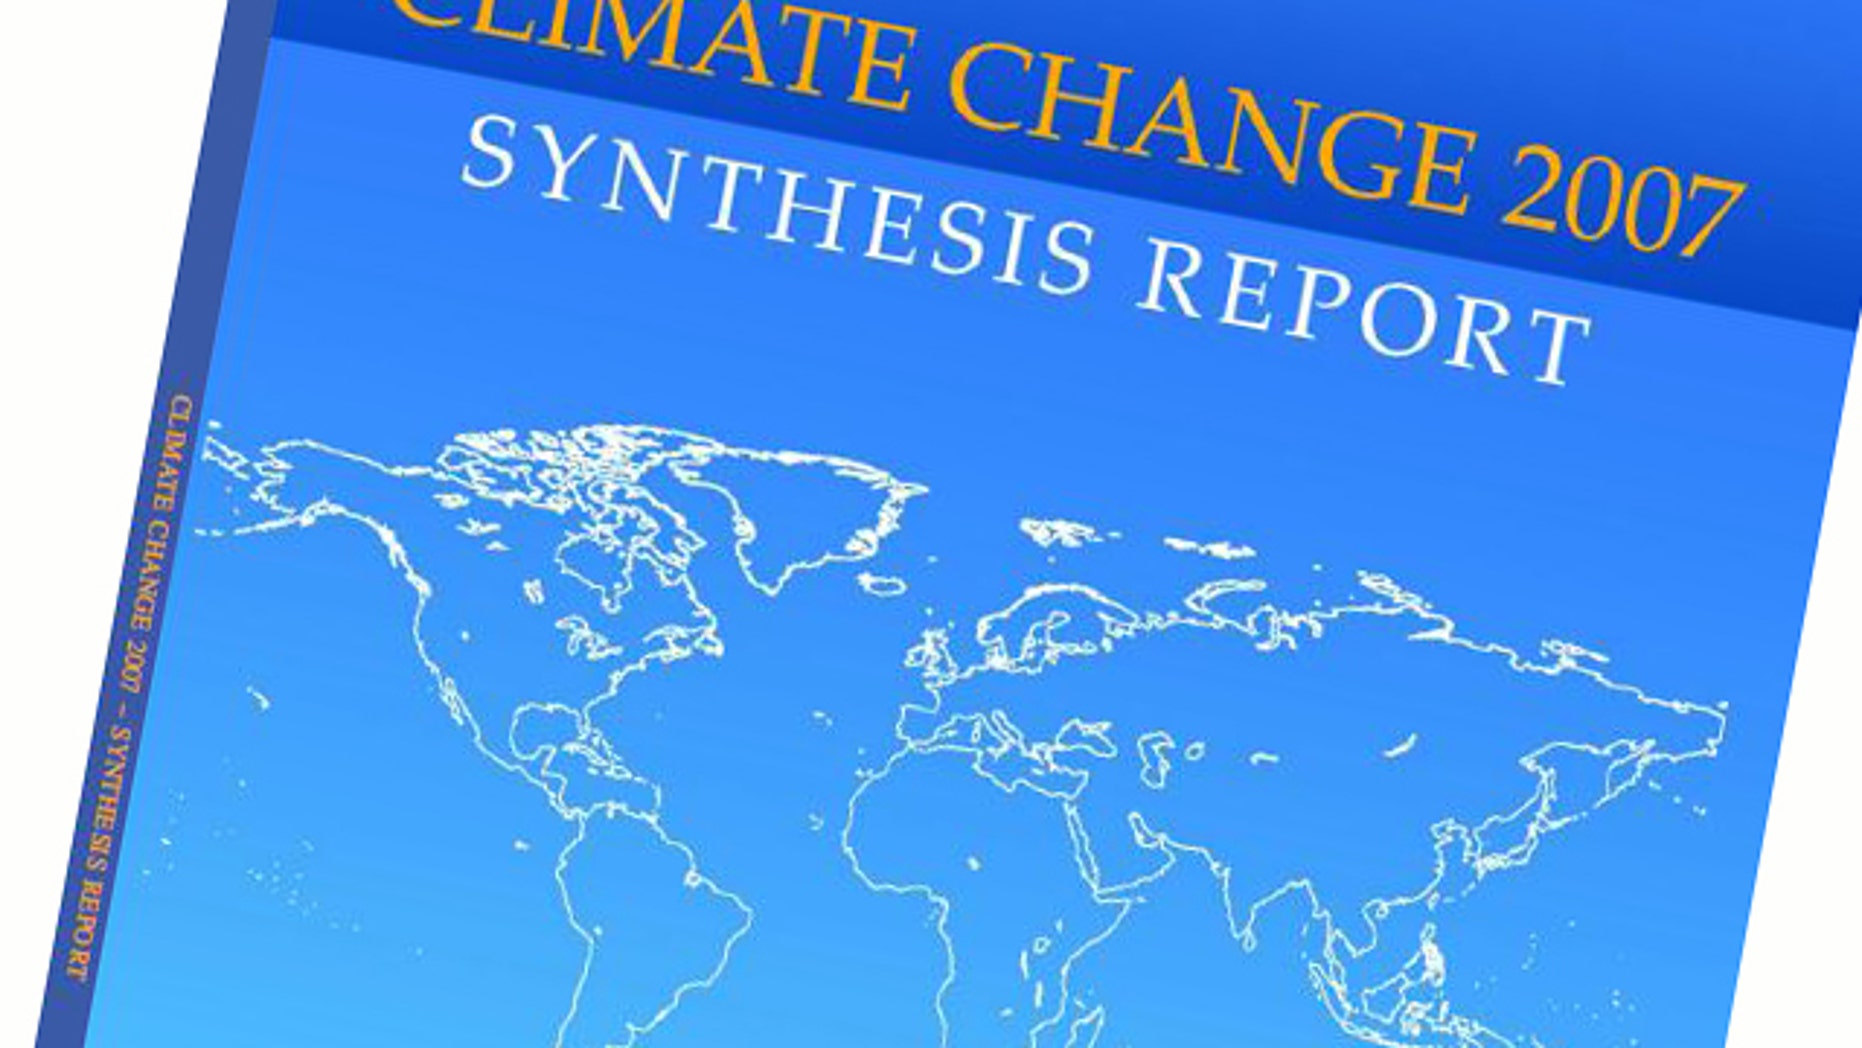 4th climate change report findings